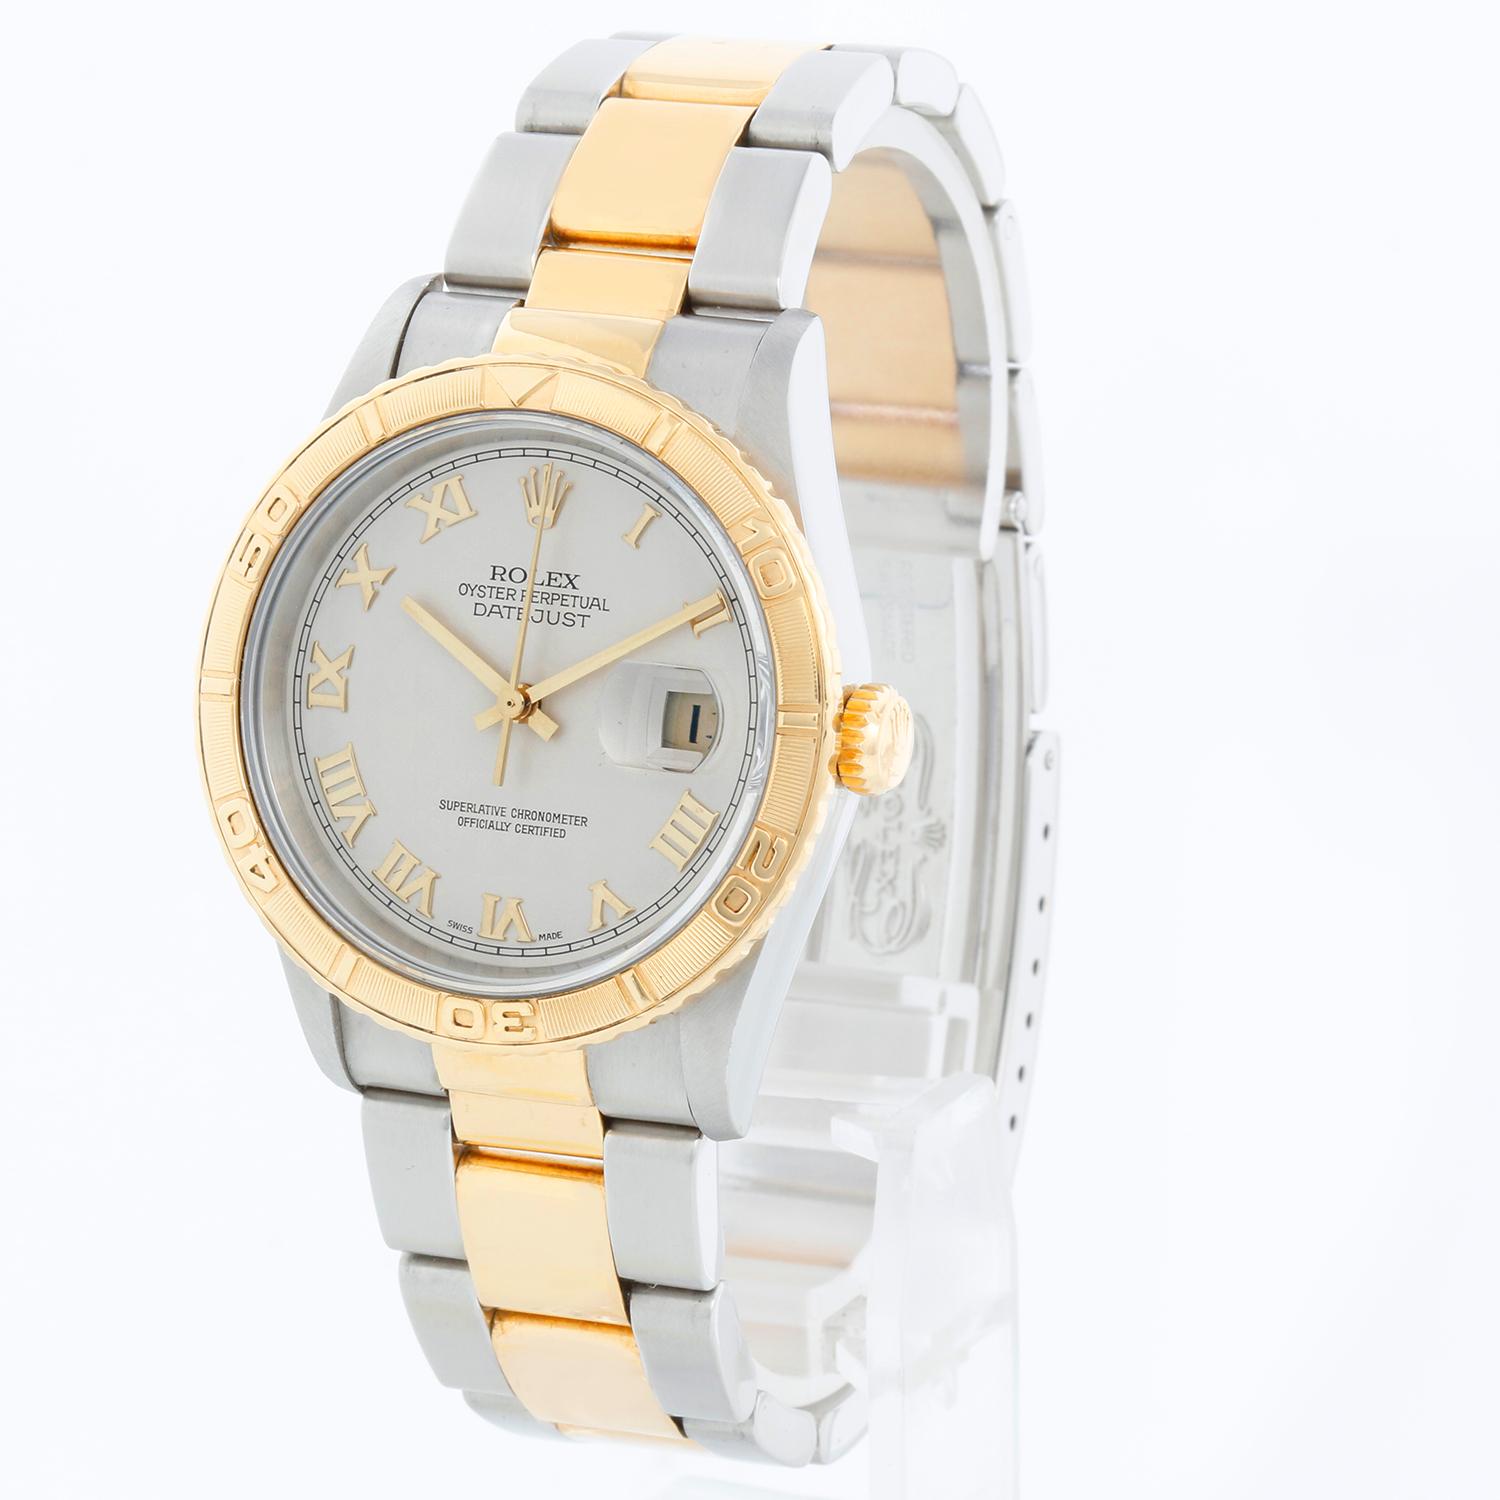 Rolex Turnograph Men's 2-Tone Watch 16263 - Automatic winding, 31 jewels, Quickset, sapphire crystal. Stainless steel case with 18k yellow gold bezel (36mm diameter). Ivory Pyramid dial . Stainless steel and 18k yellow gold Oyster bracelet.